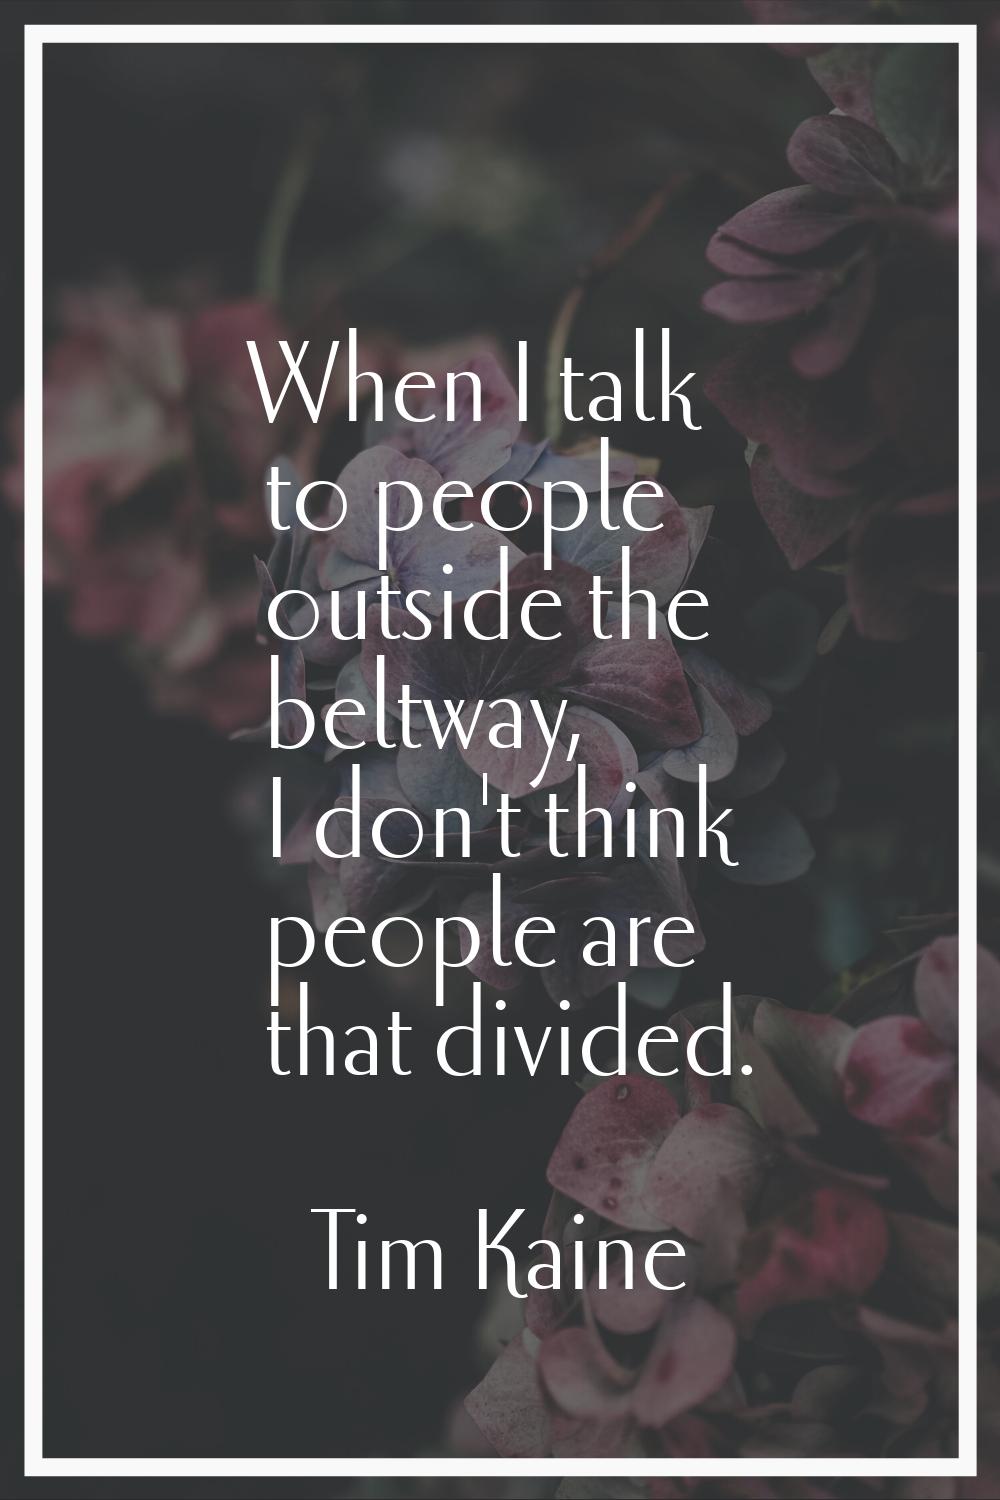 When I talk to people outside the beltway, I don't think people are that divided.